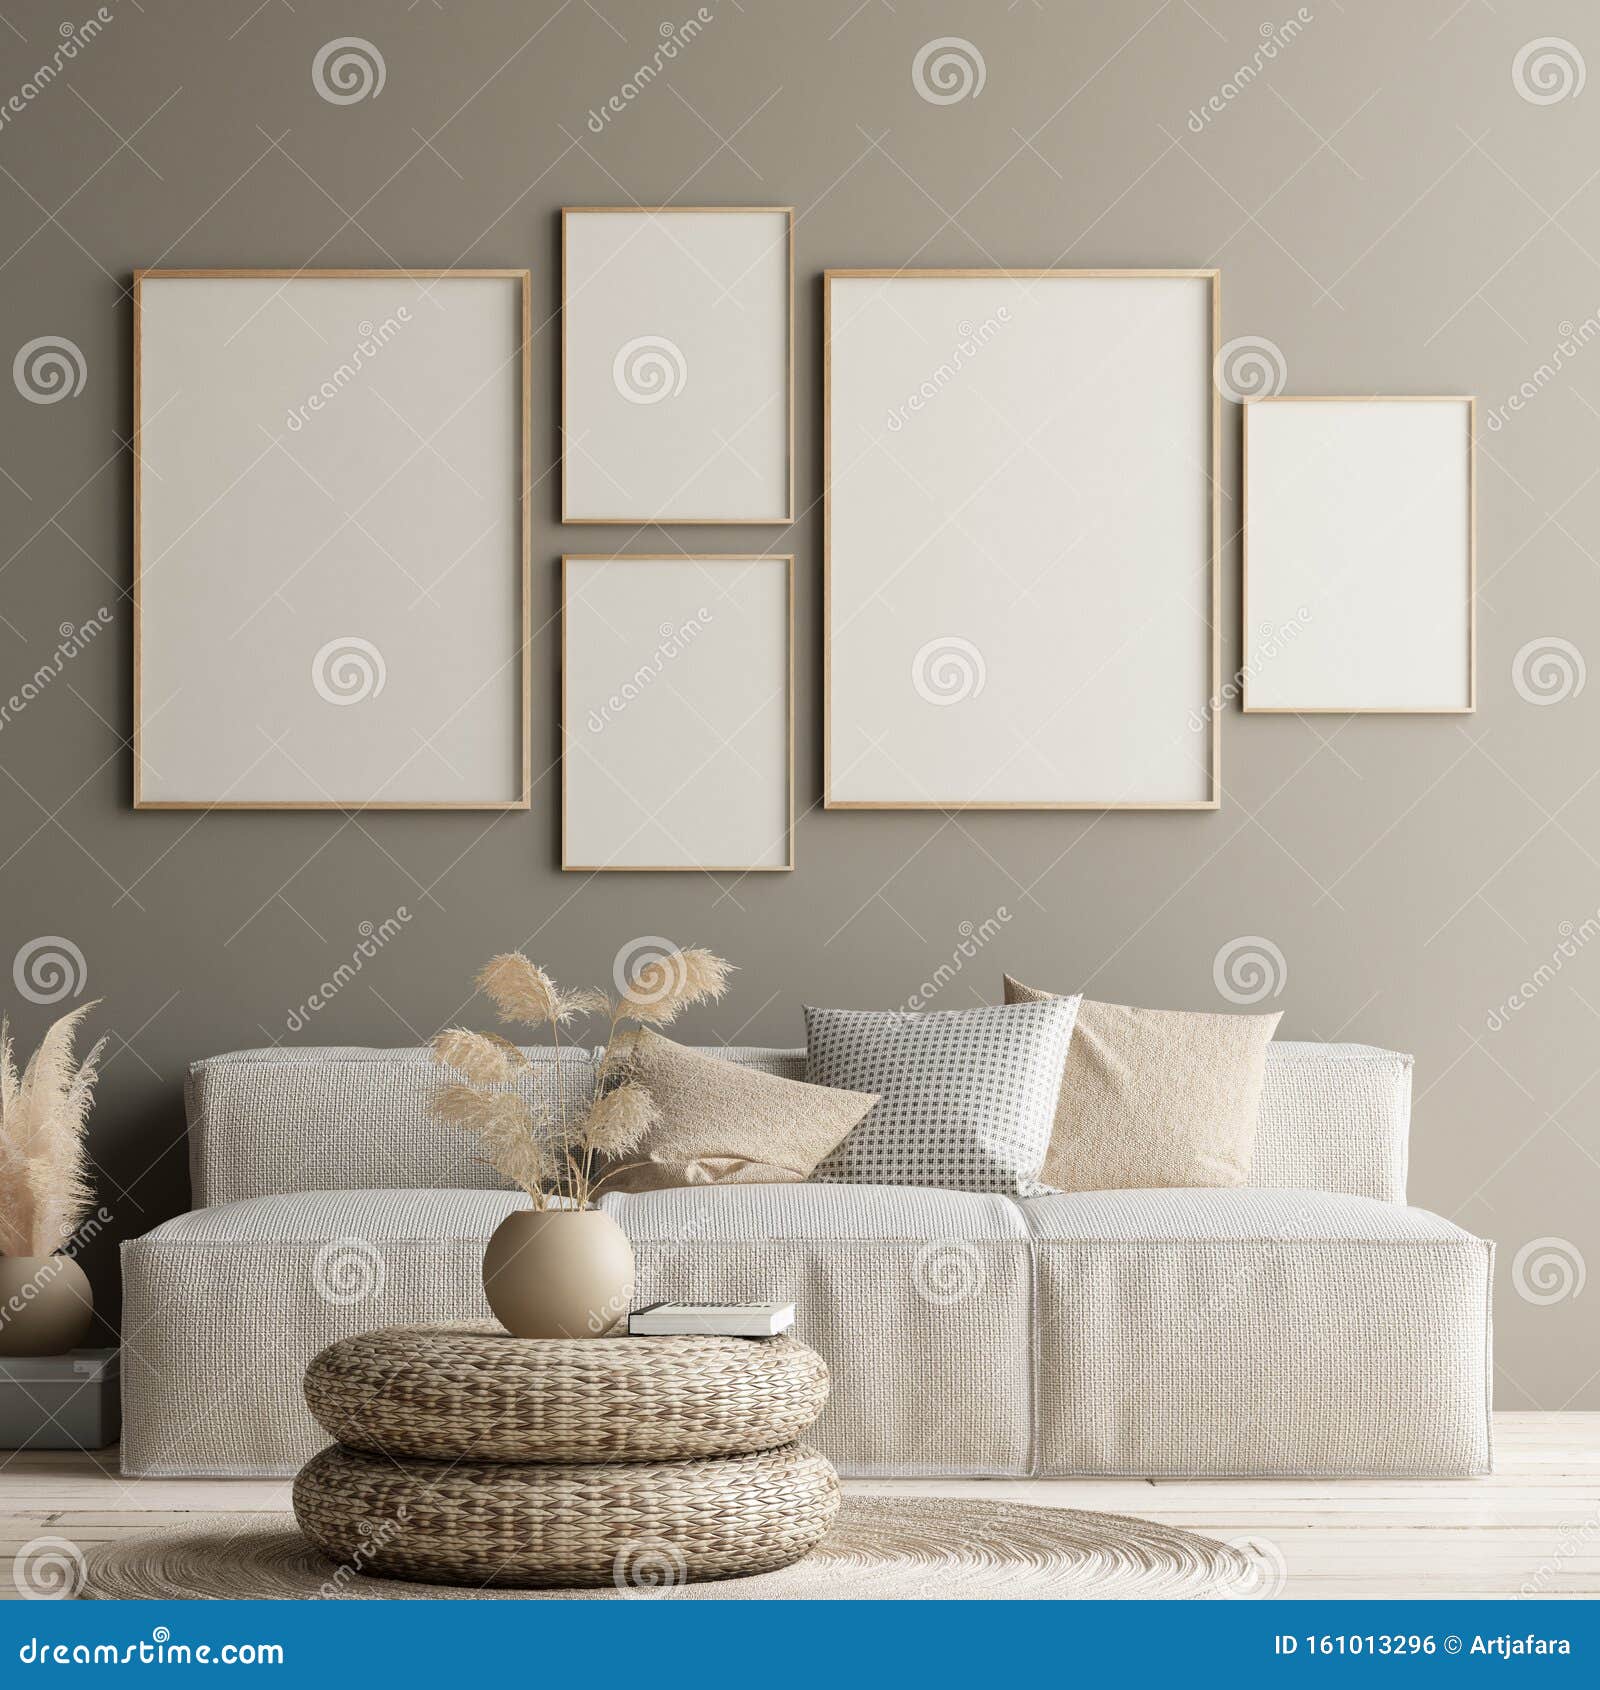 mock up poster in home interior with minimal decor, scandinavian concept